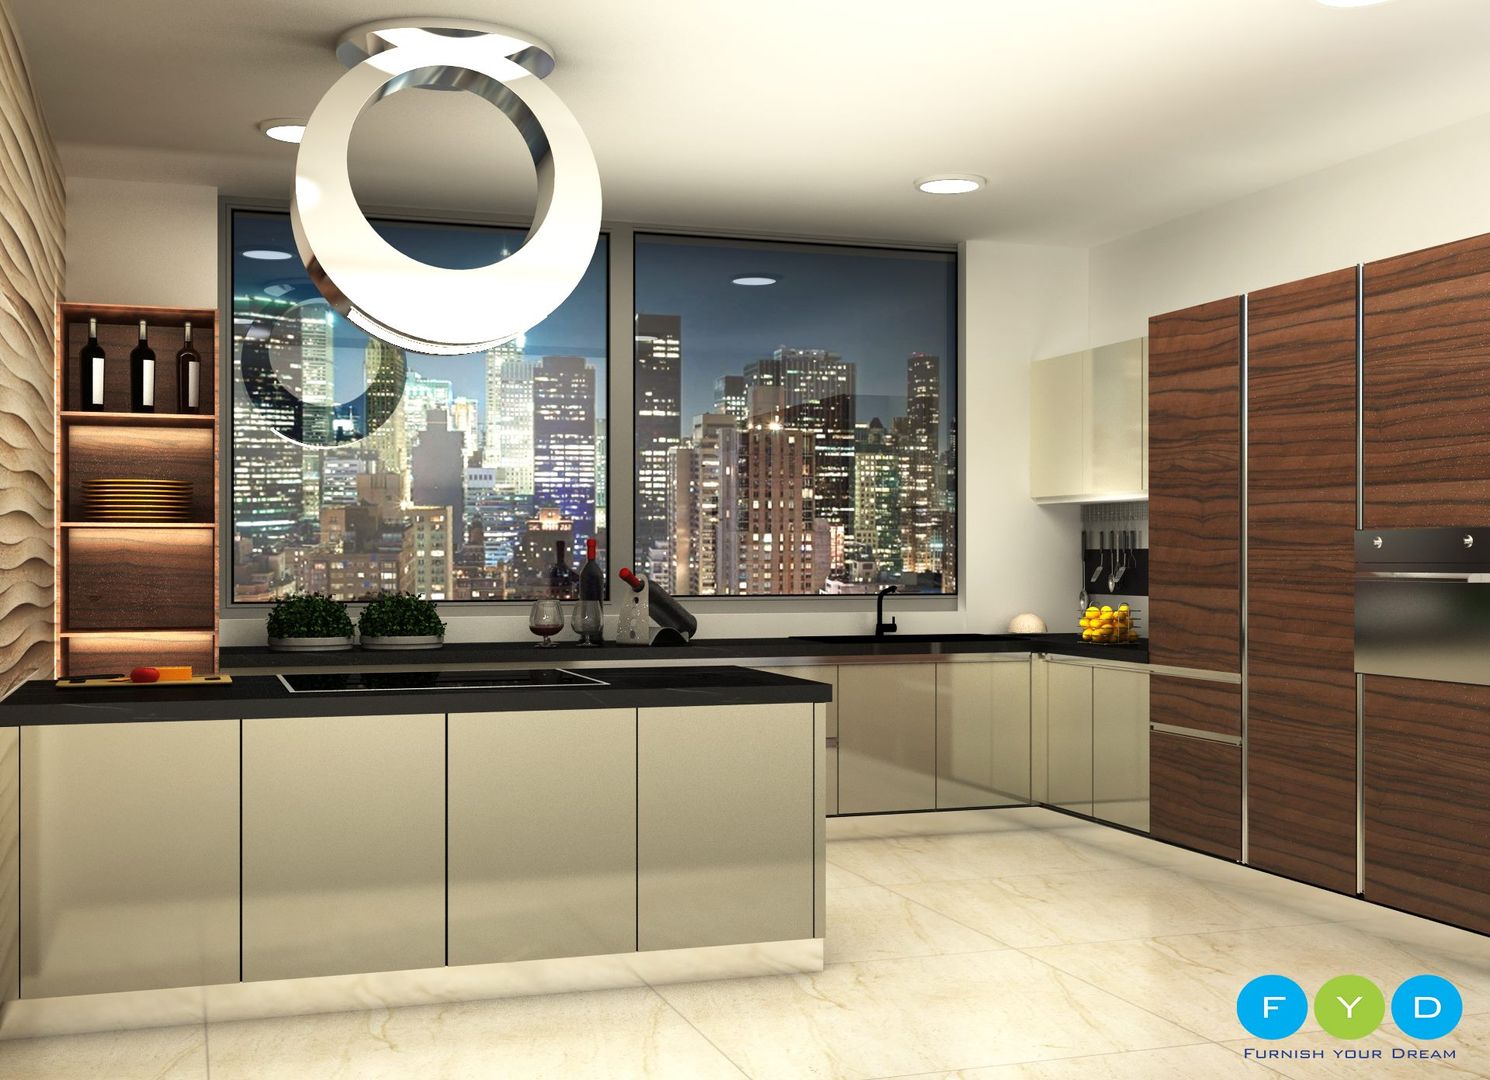 homify Modern kitchen Cabinetry,Building,Countertop,Table,Product,Mirror,Interior design,Automotive design,Lighting,Shelving